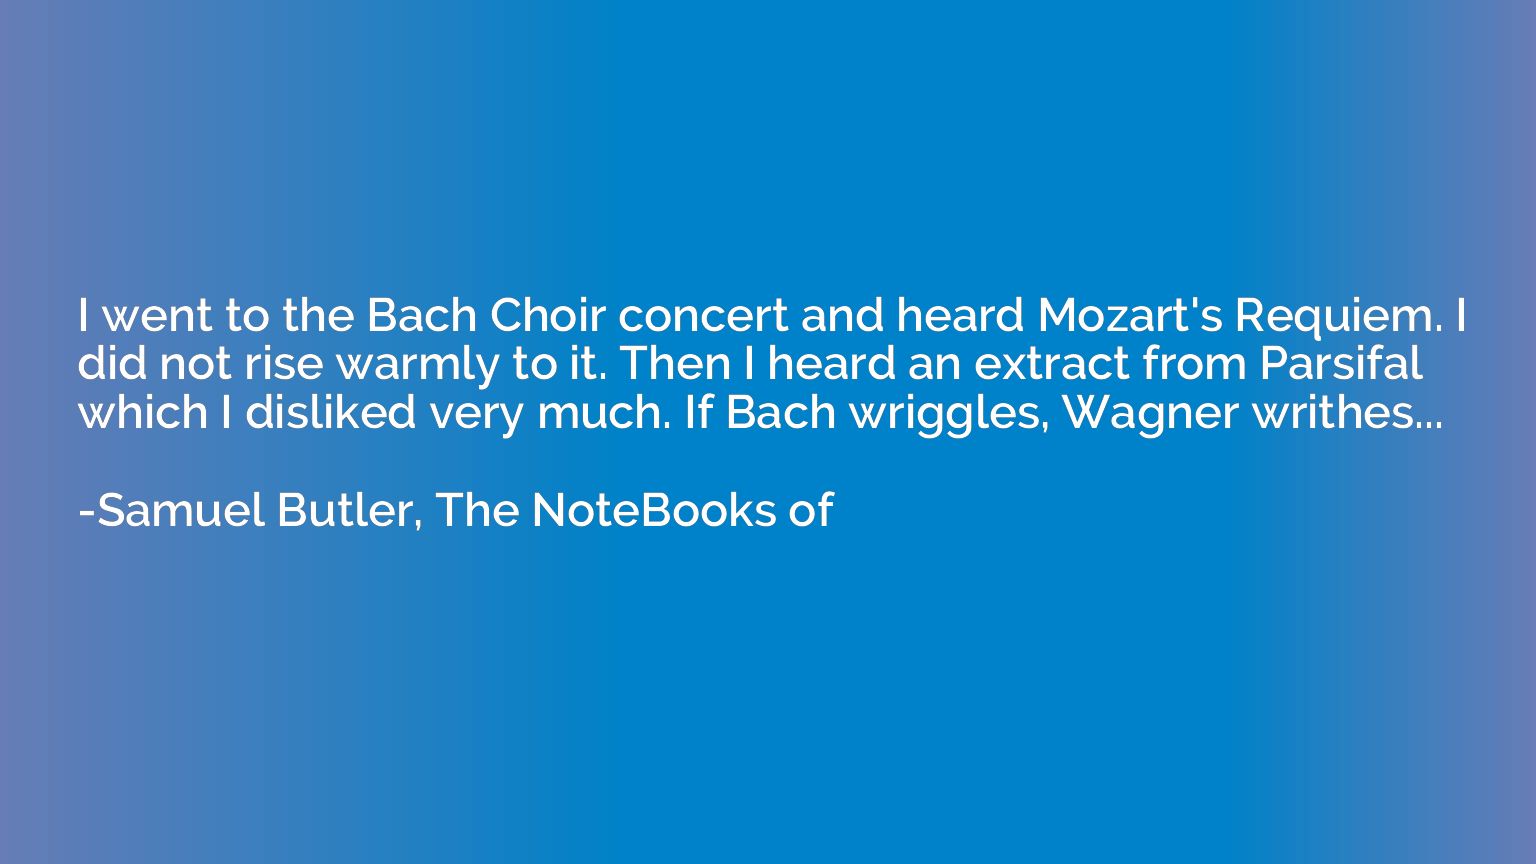 I went to the Bach Choir concert and heard Mozart's Requiem.